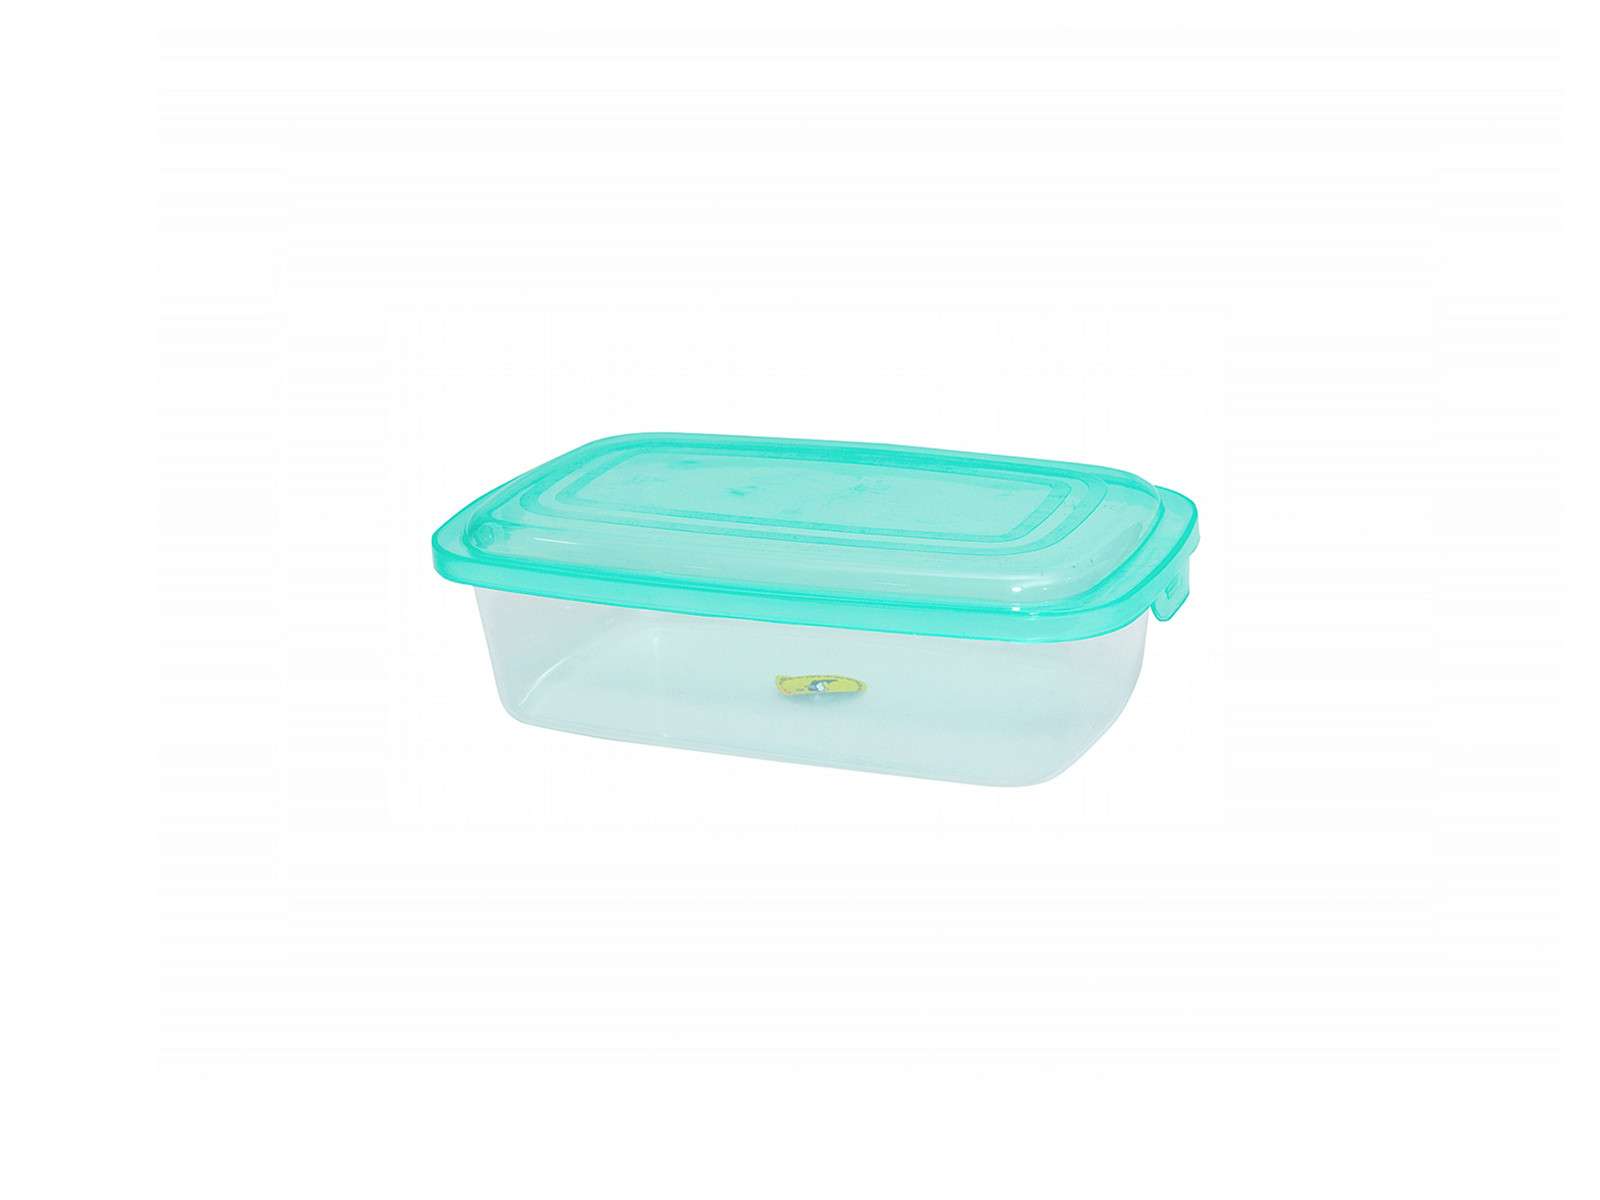 Rounded rectangular container- Large